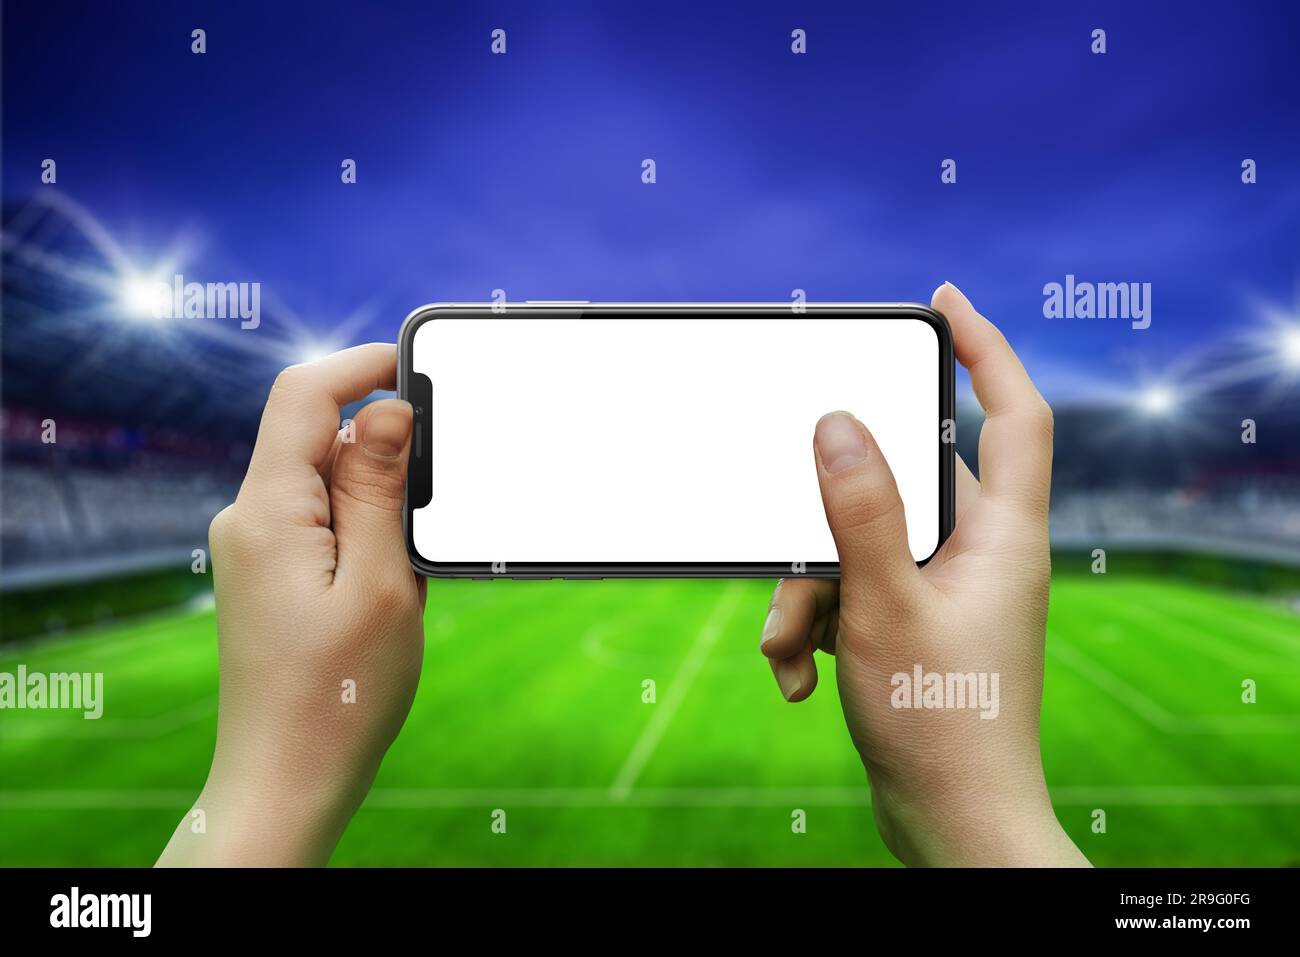 Phone in hands, horizontal position. Isolated screen for mockup. Soccer stadium in background Stock Photo